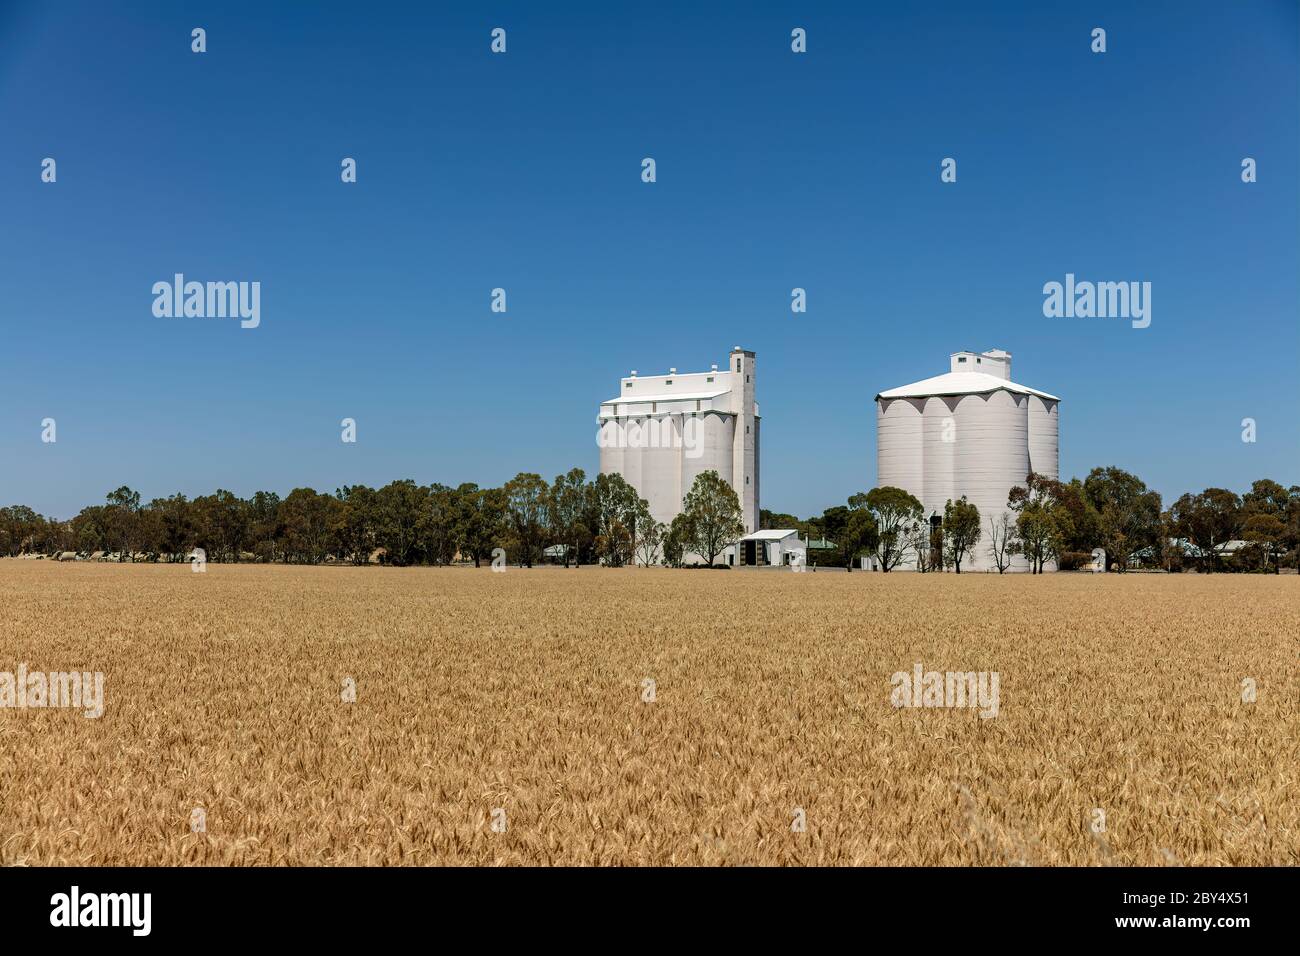 Wheat ripening in a field with white silos in rural South Australia Stock Photo